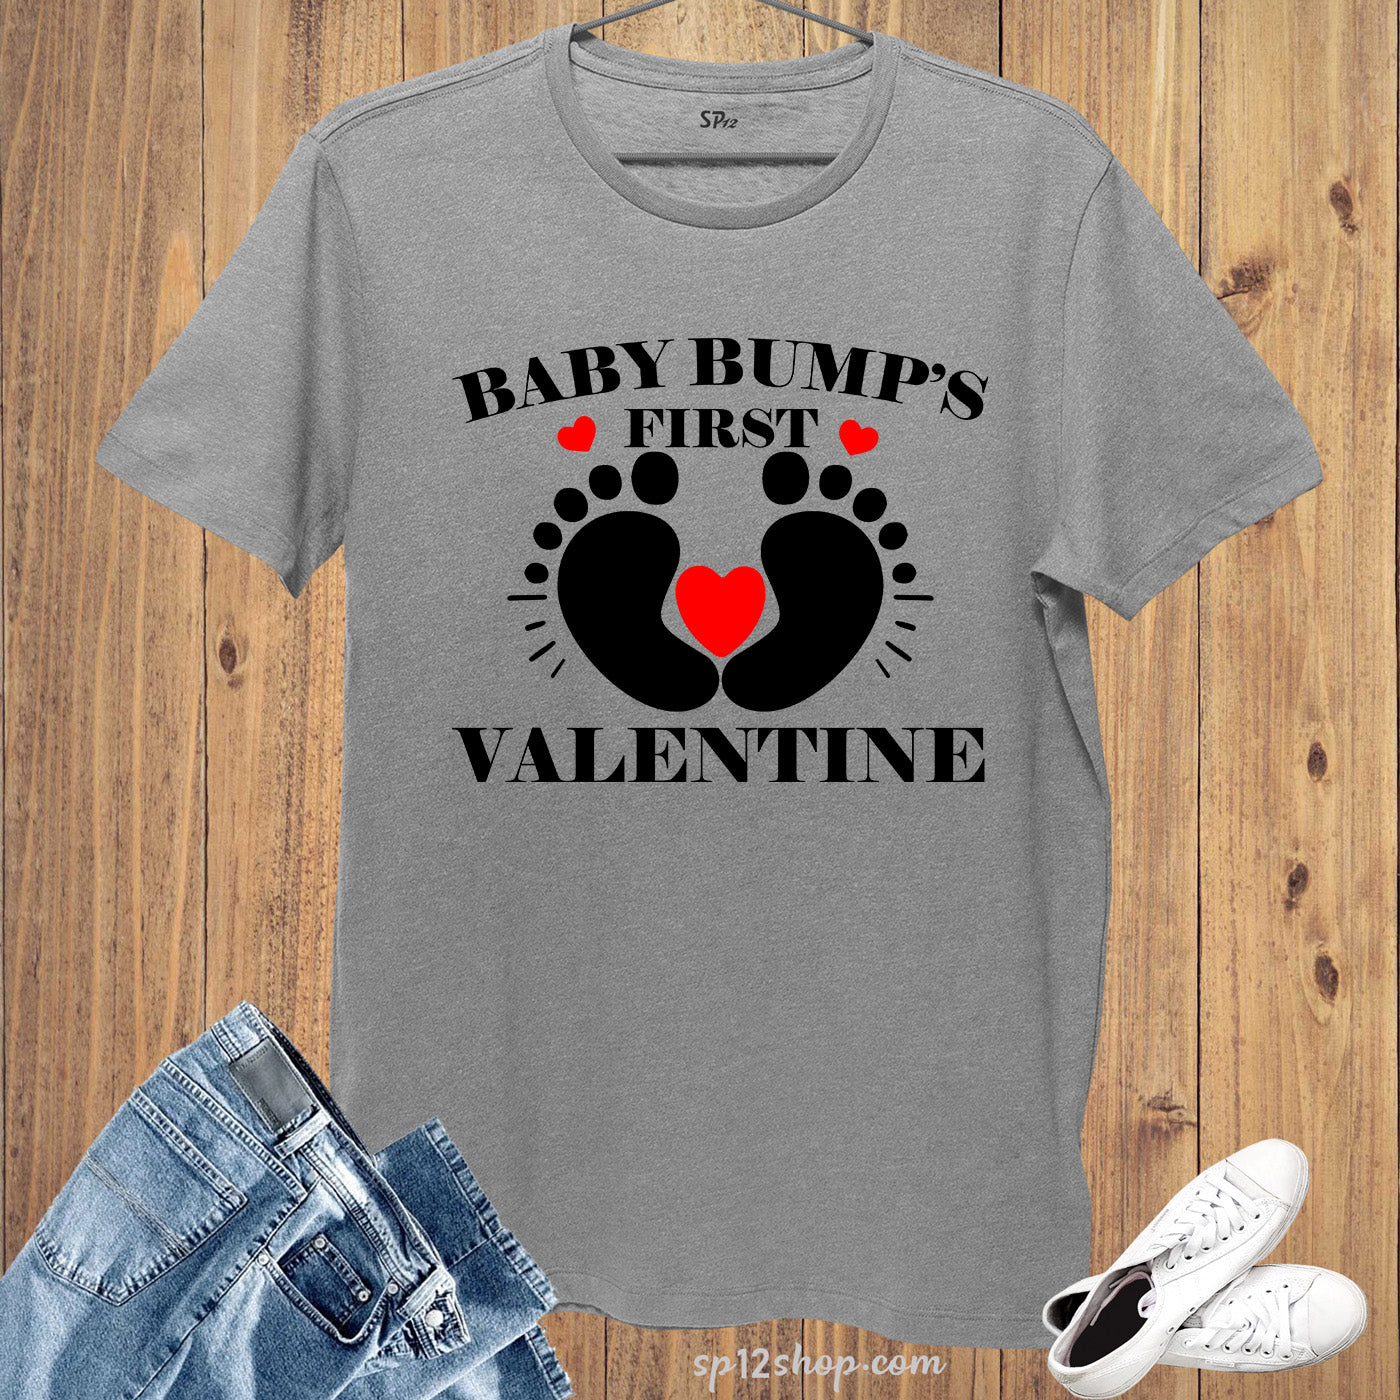 Baby Bumps First Valentine Maternity T Shirt